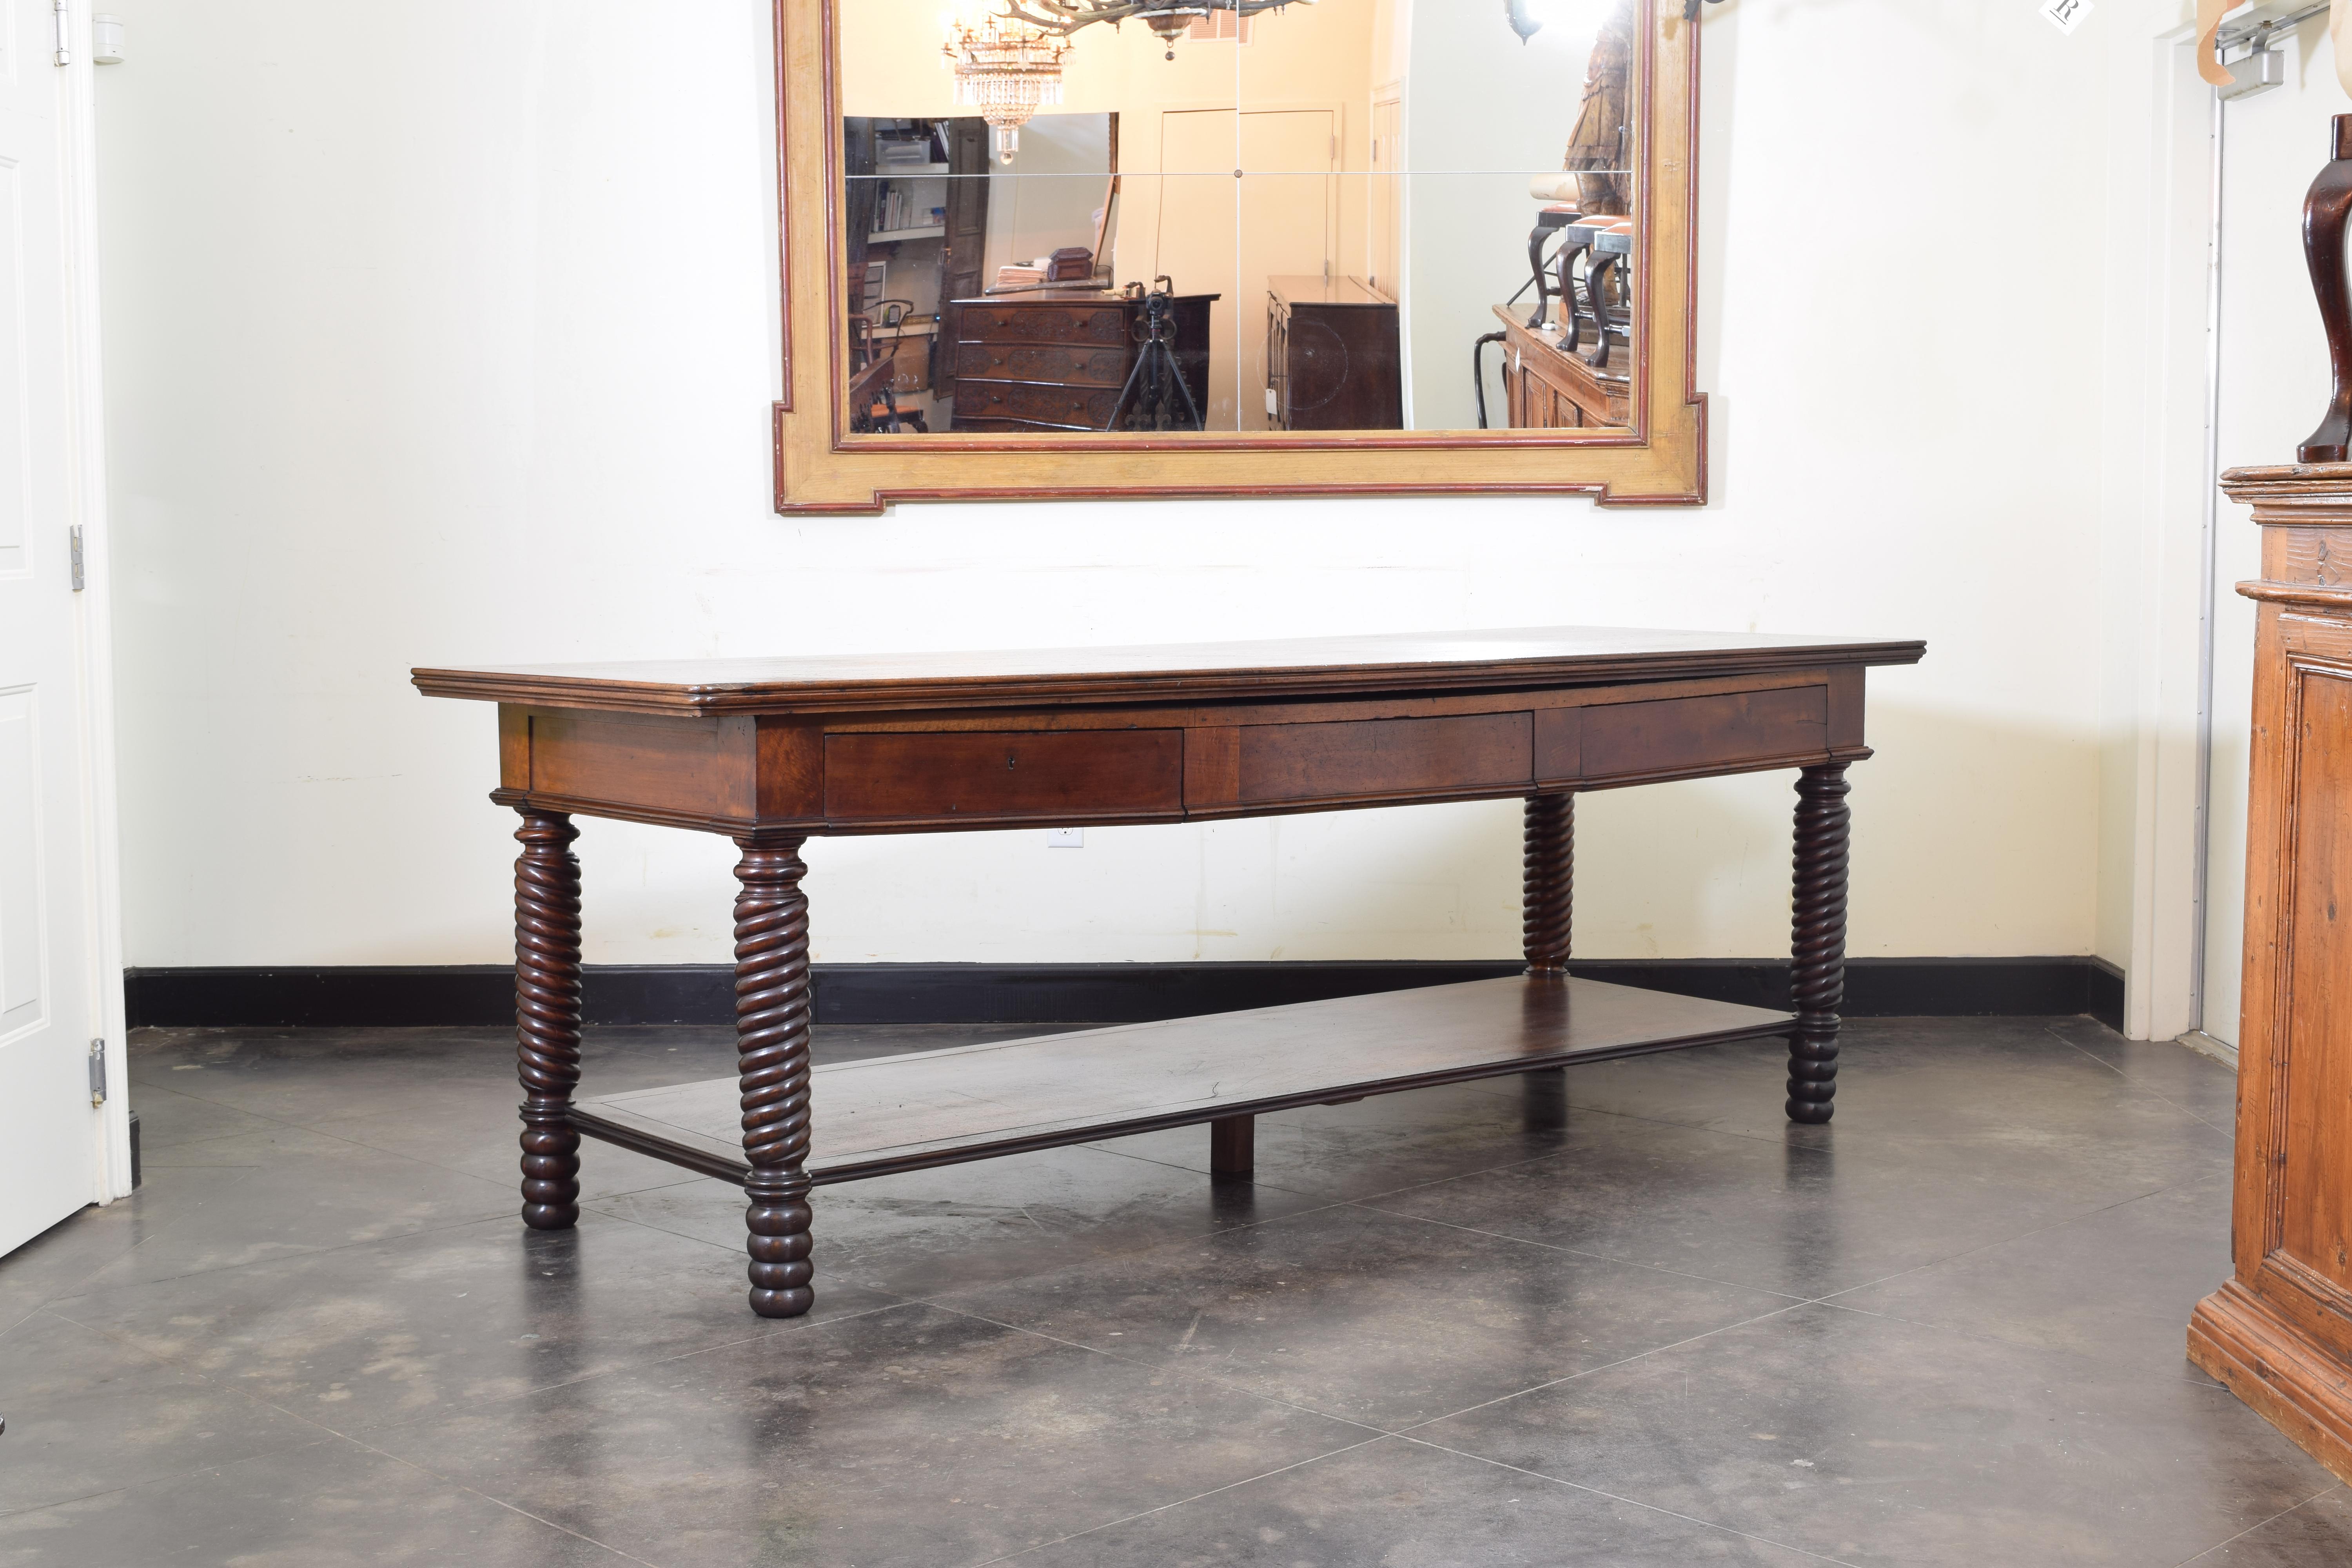 Large and in charge this drapers table has a rectangular top with a molded edge atop a frame housing three drawers, the legs with bold spiral turning, the lower shelf supported by a central brace.